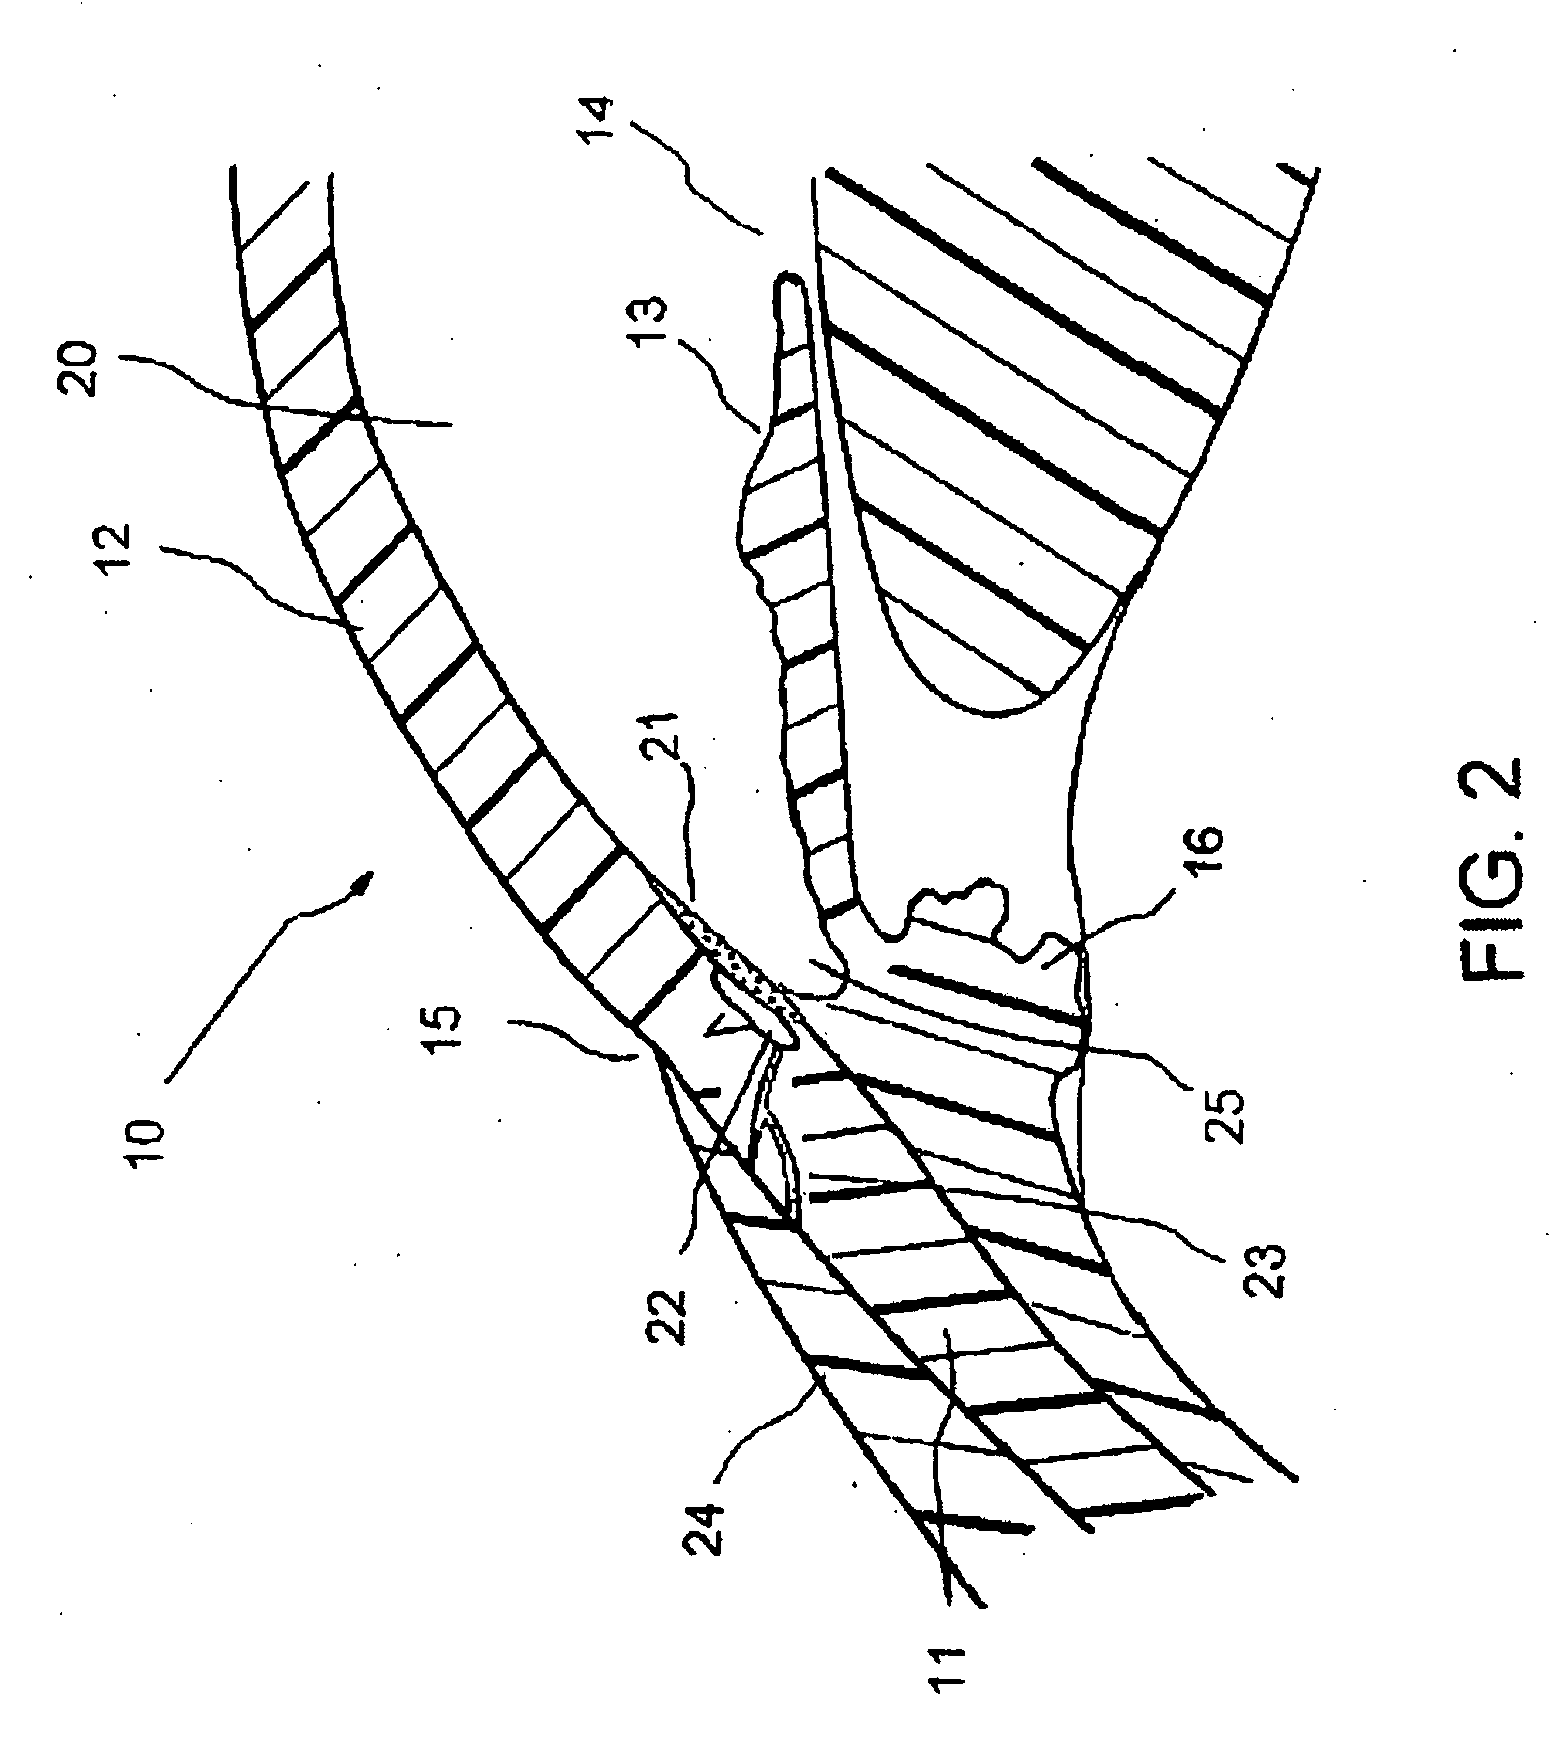 Method of treating glaucoma using an implant having a uniform diameter between the anterior chamber and Schlemm's canal